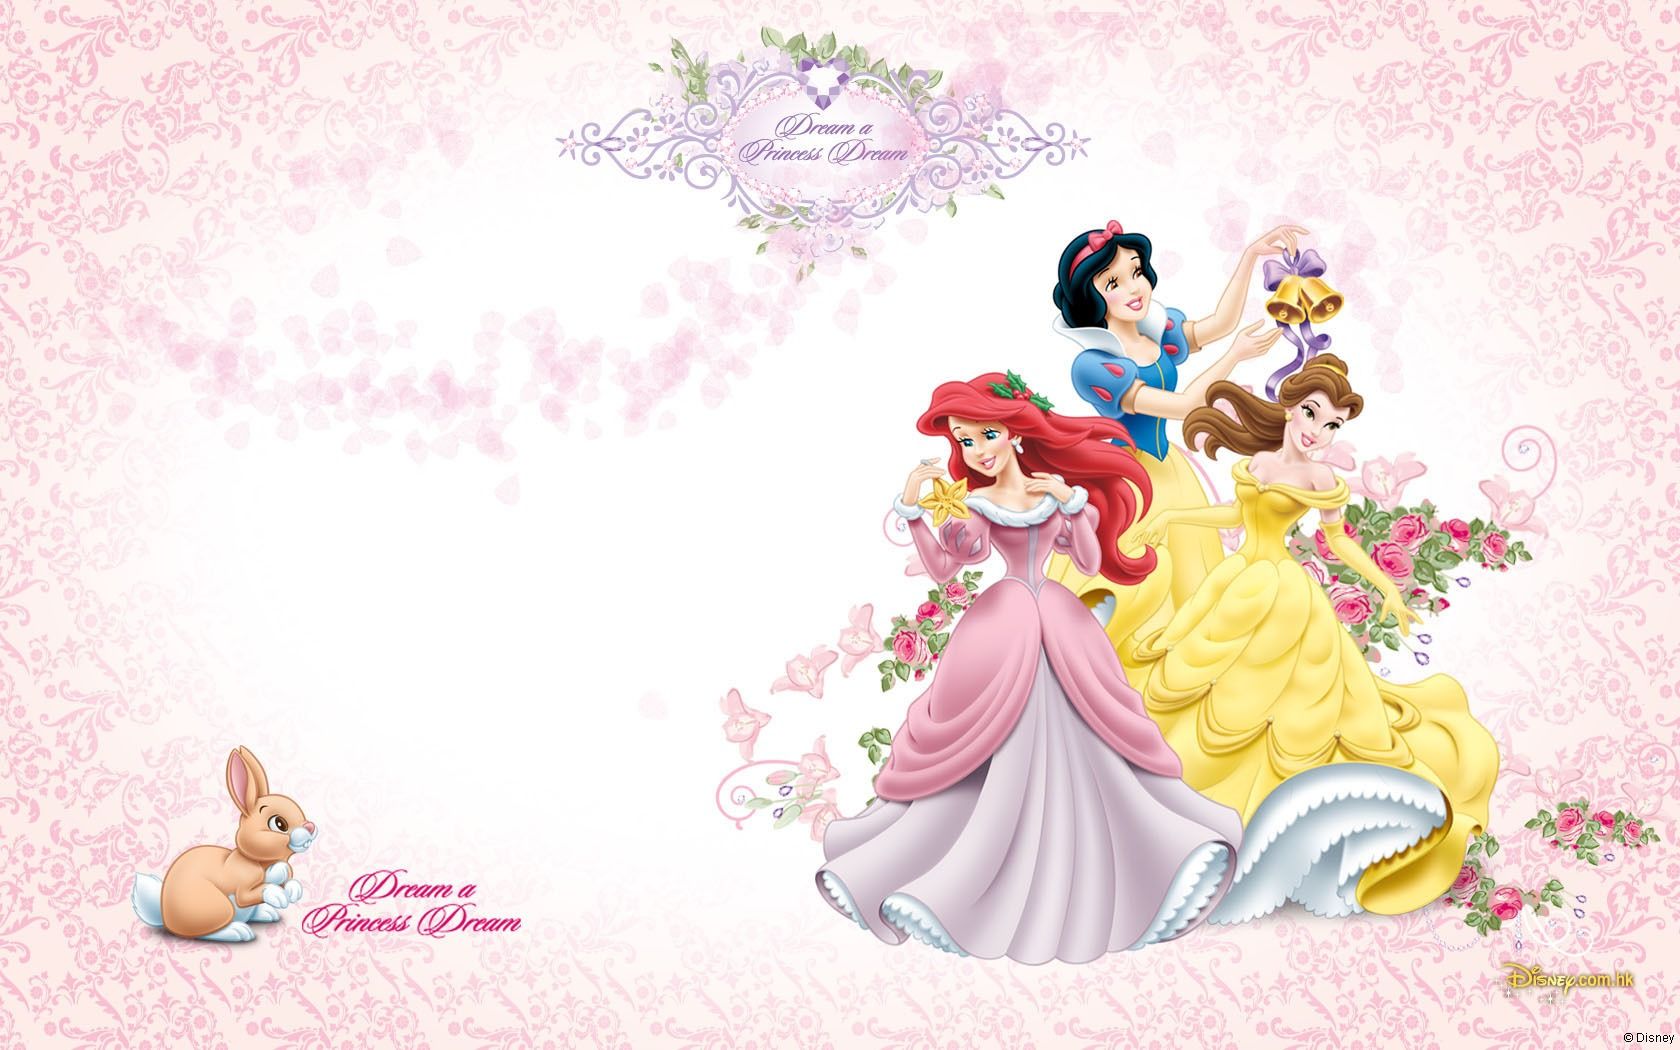 Awesome Background: Amazing Princess Image Collection